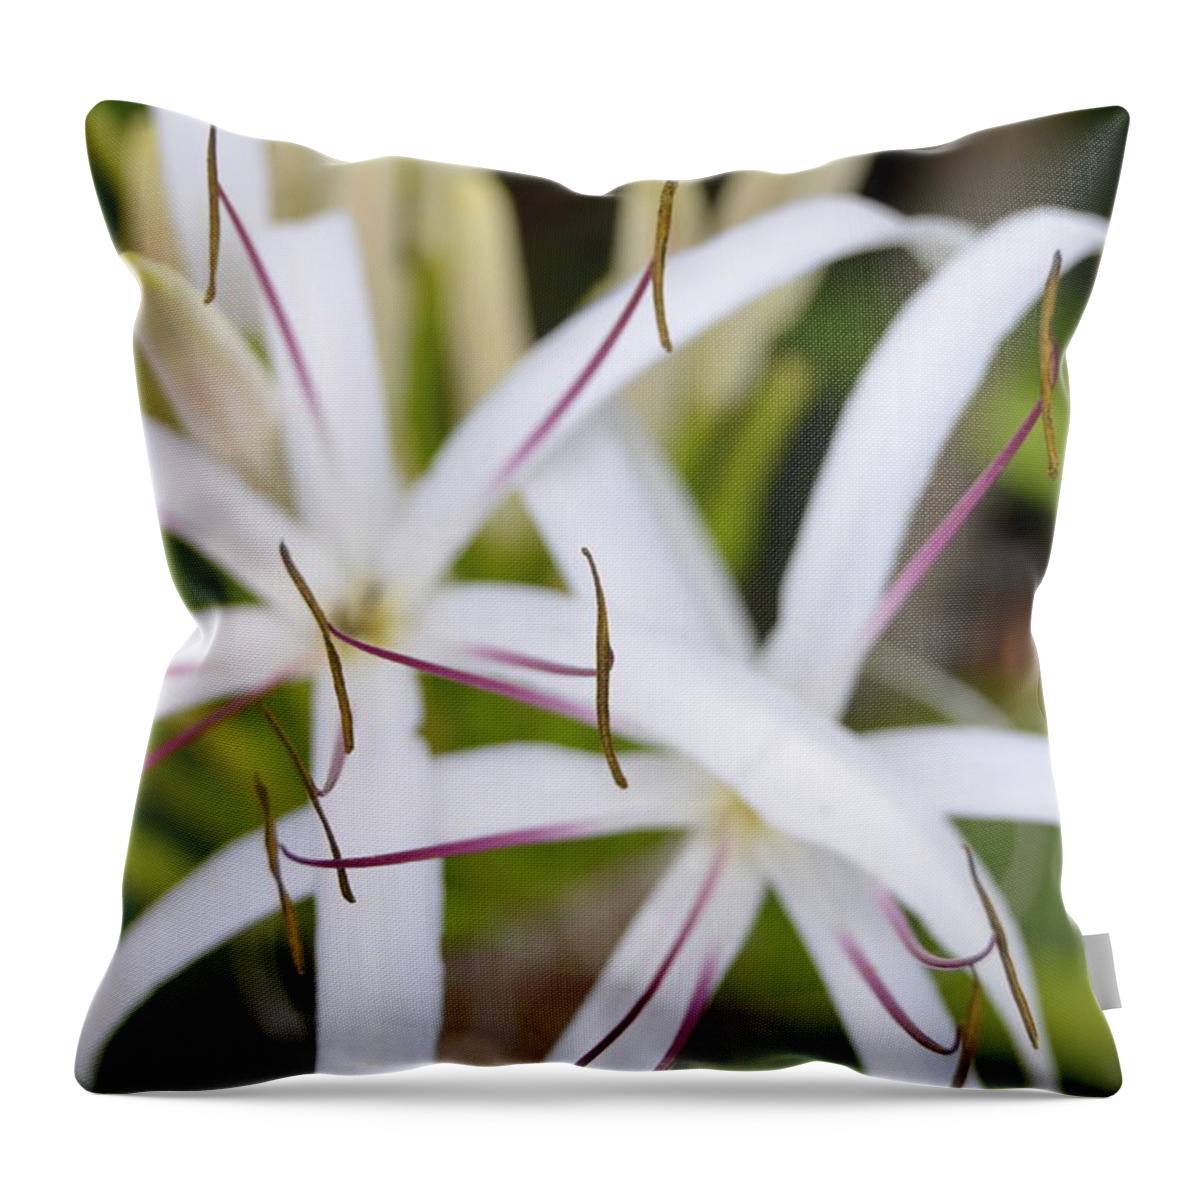 Kauai Throw Pillow featuring the photograph Asiatic Poison Lily 2 by Amy Fose